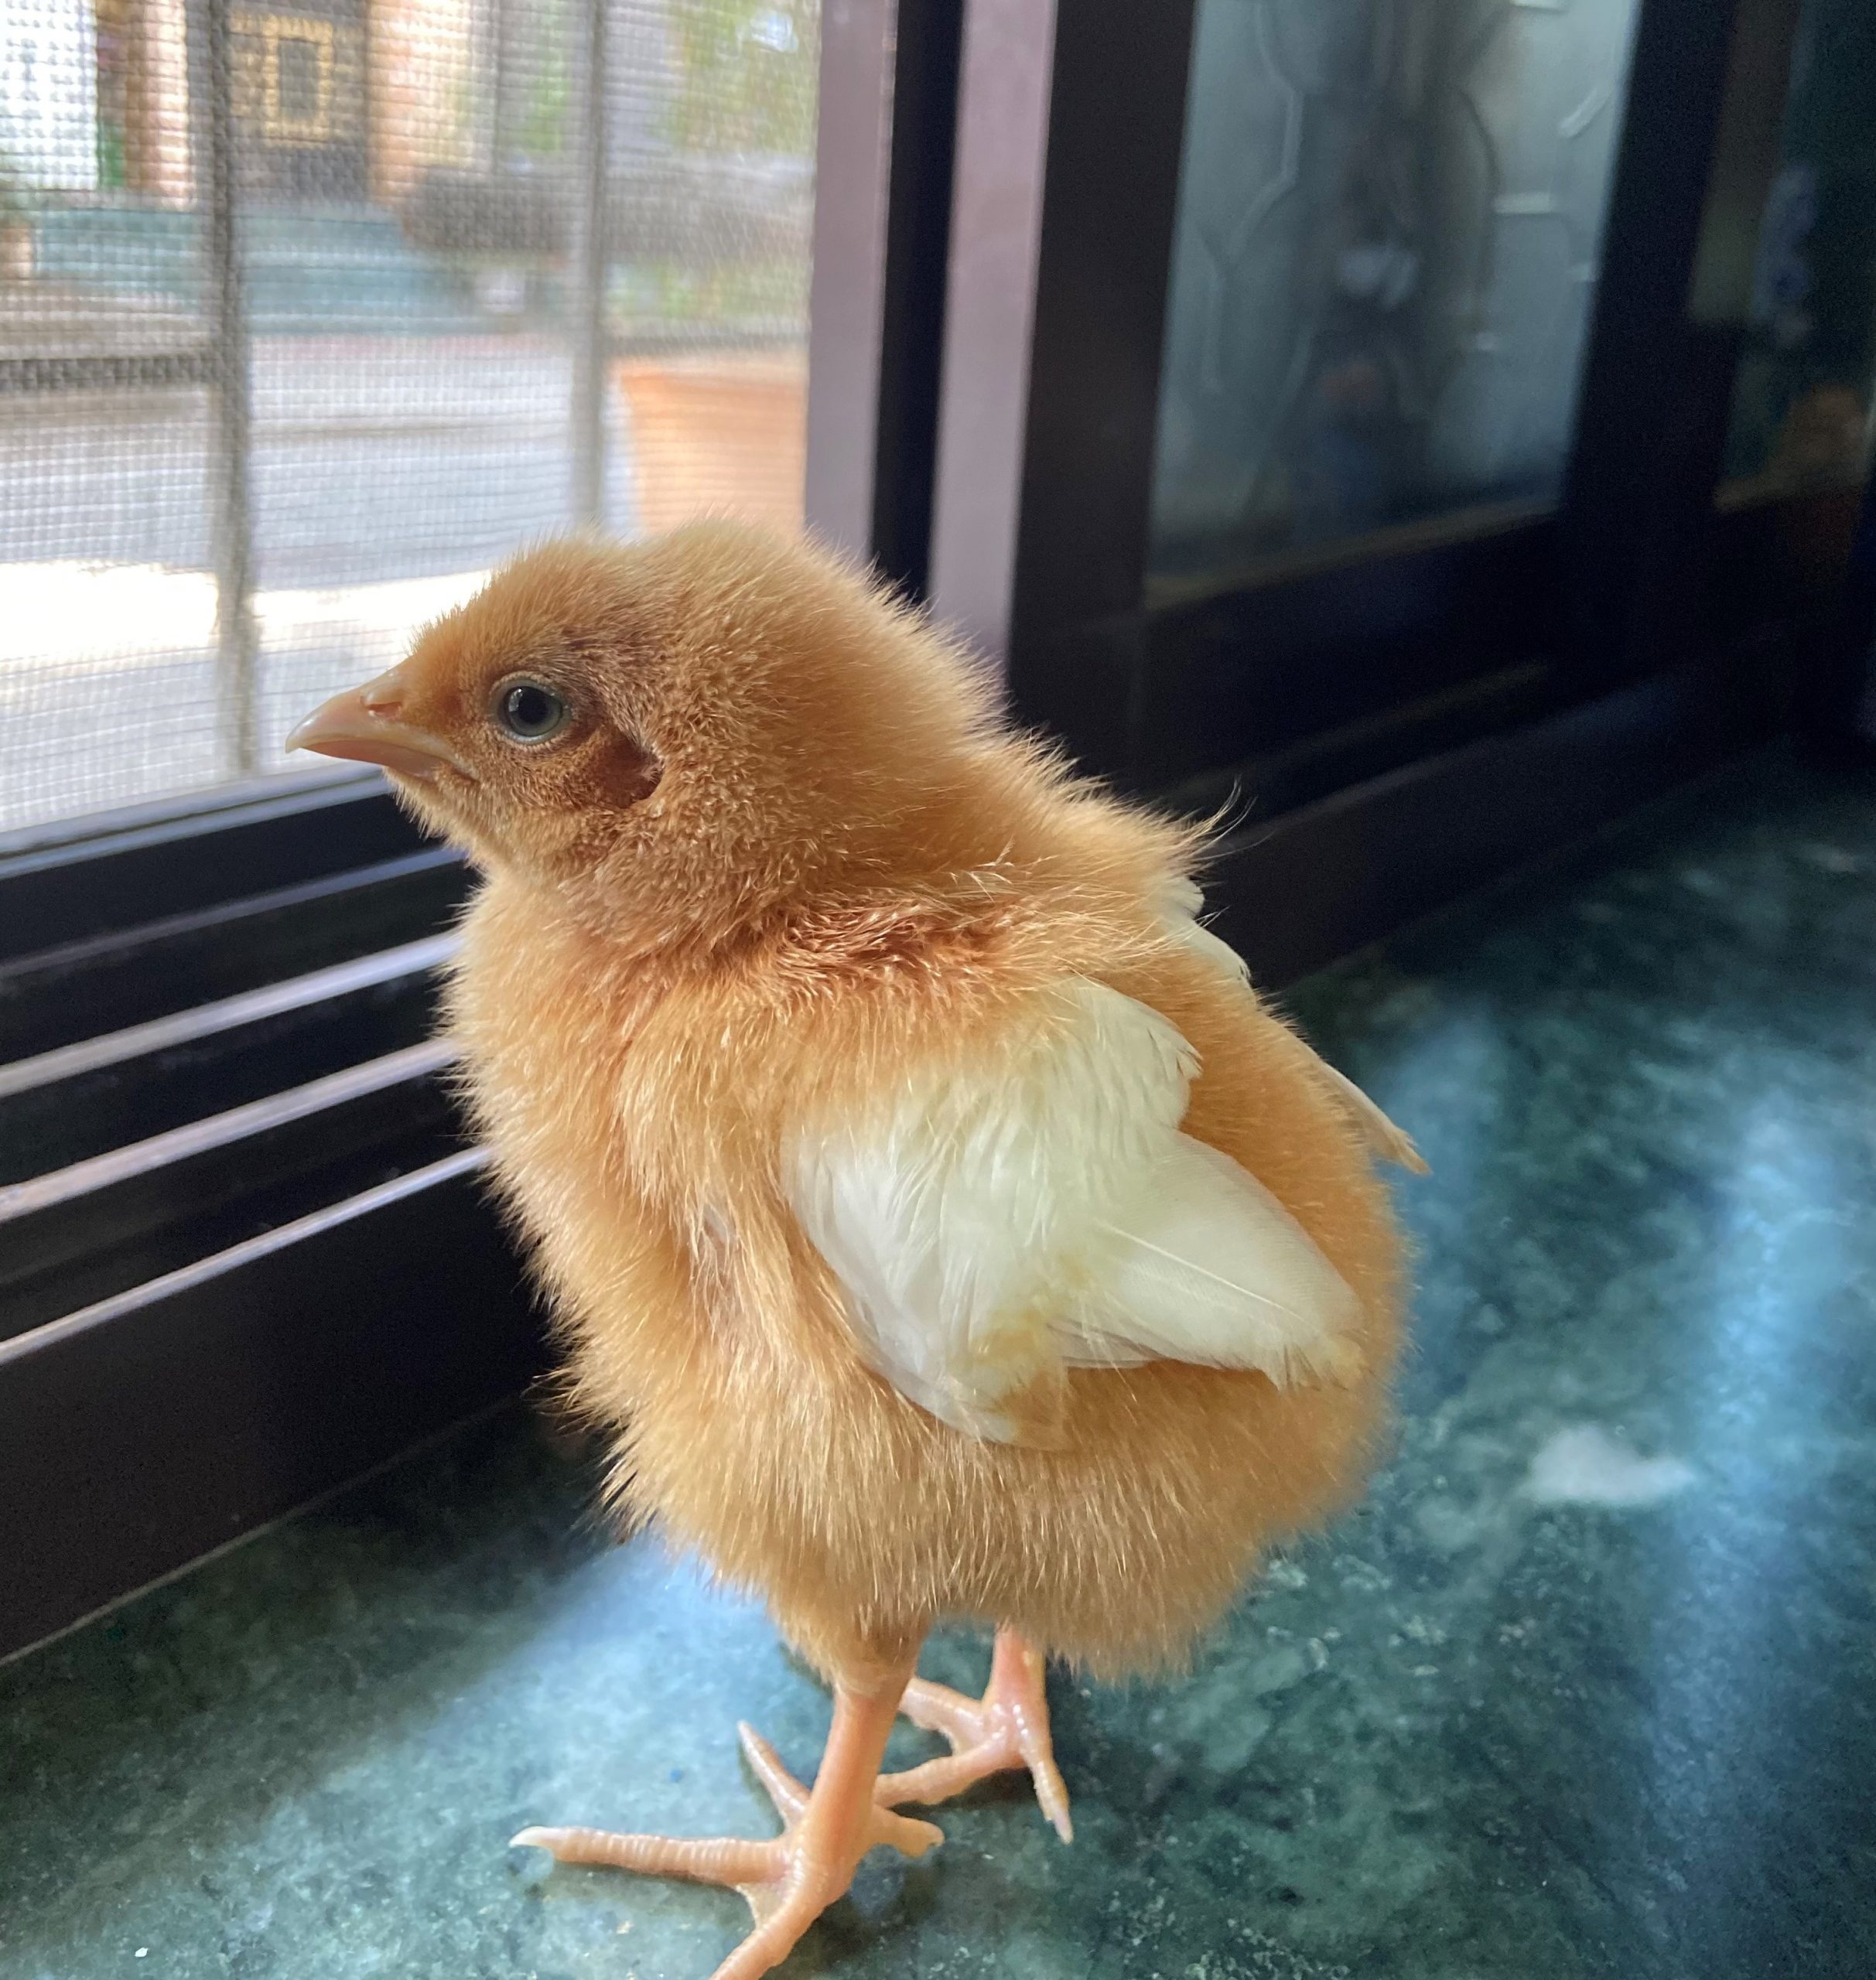 Tiny Chick in focus